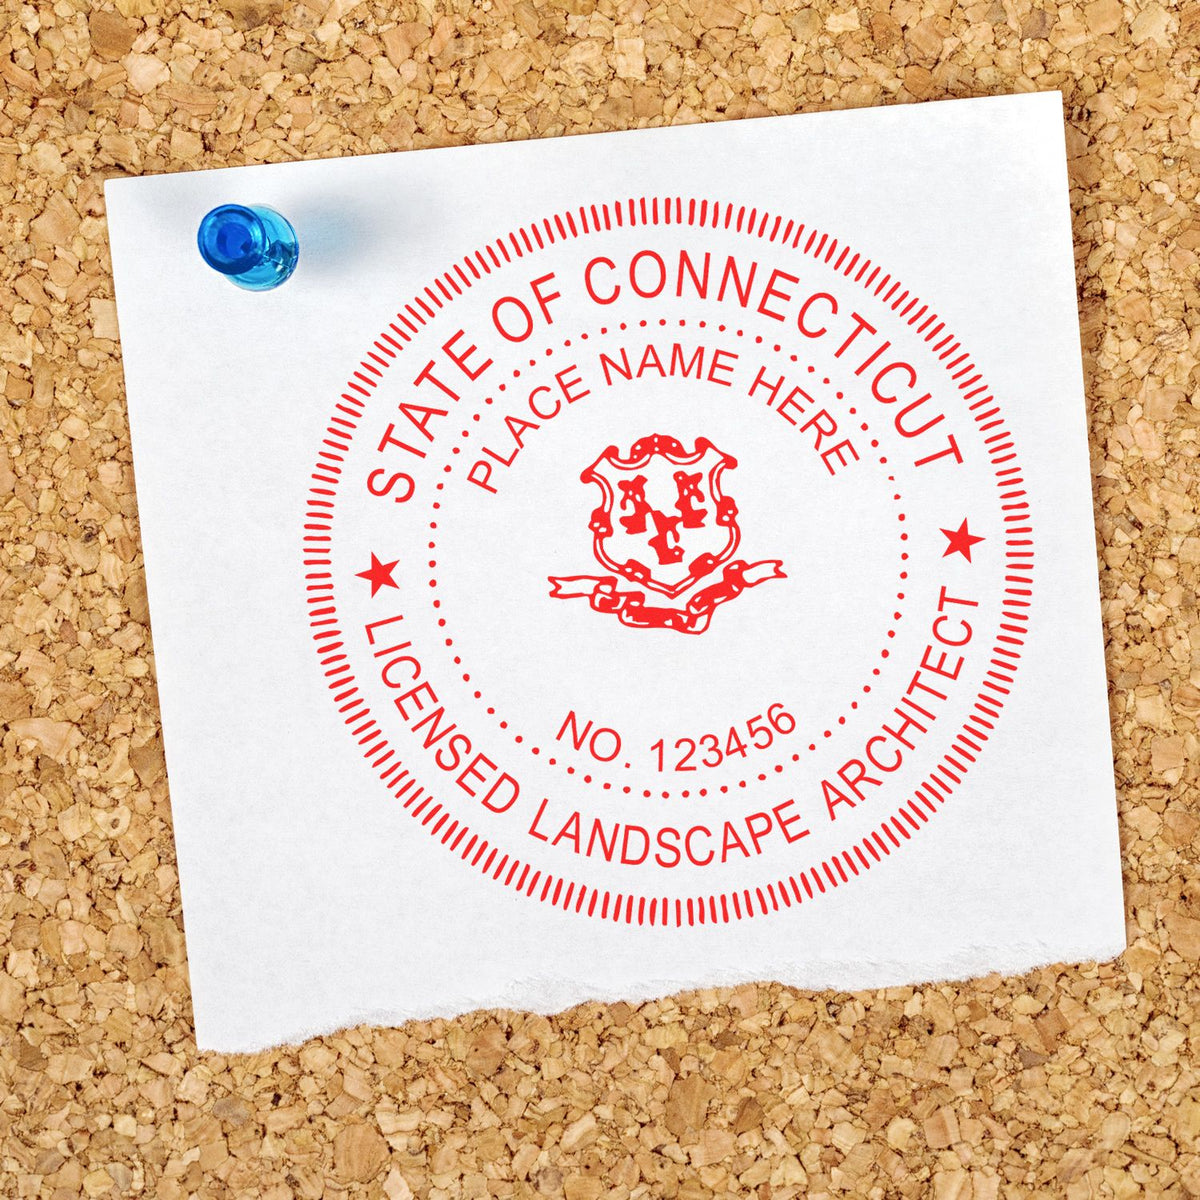 A photograph of the Digital Connecticut Landscape Architect Stamp stamp impression reveals a vivid, professional image of the on paper.